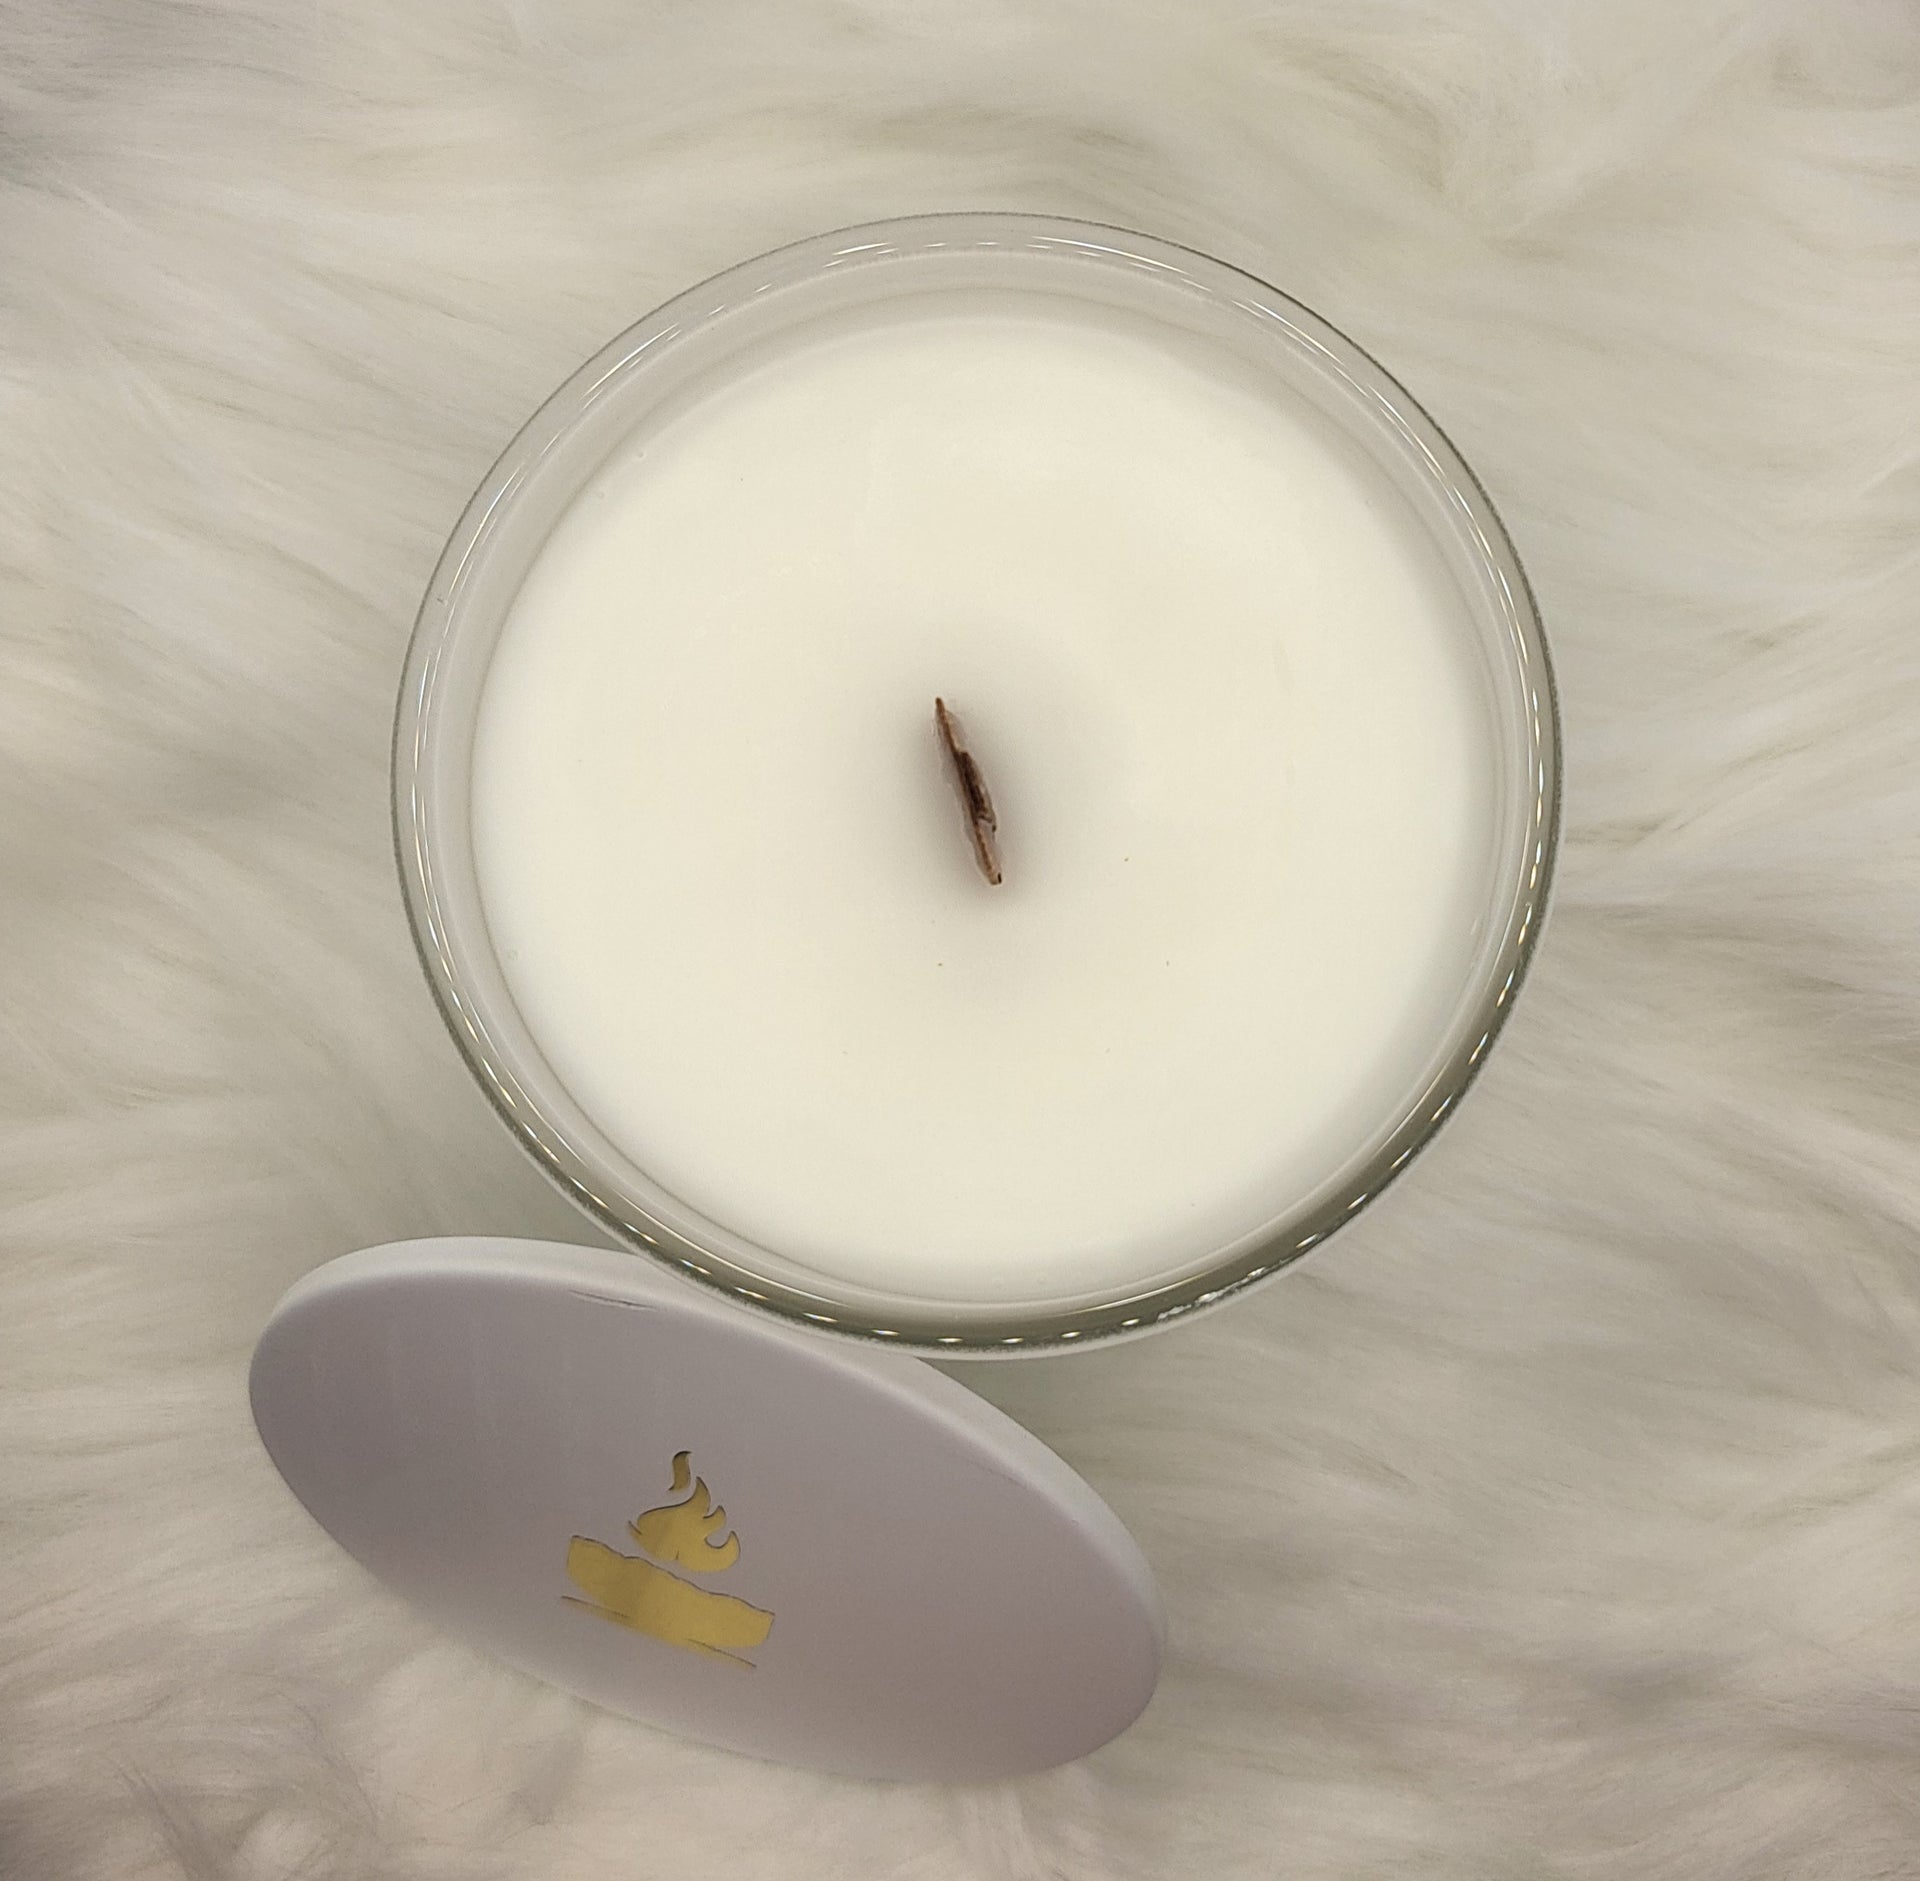 St. Andrews Luxury Candle – Wicks Candle Co.